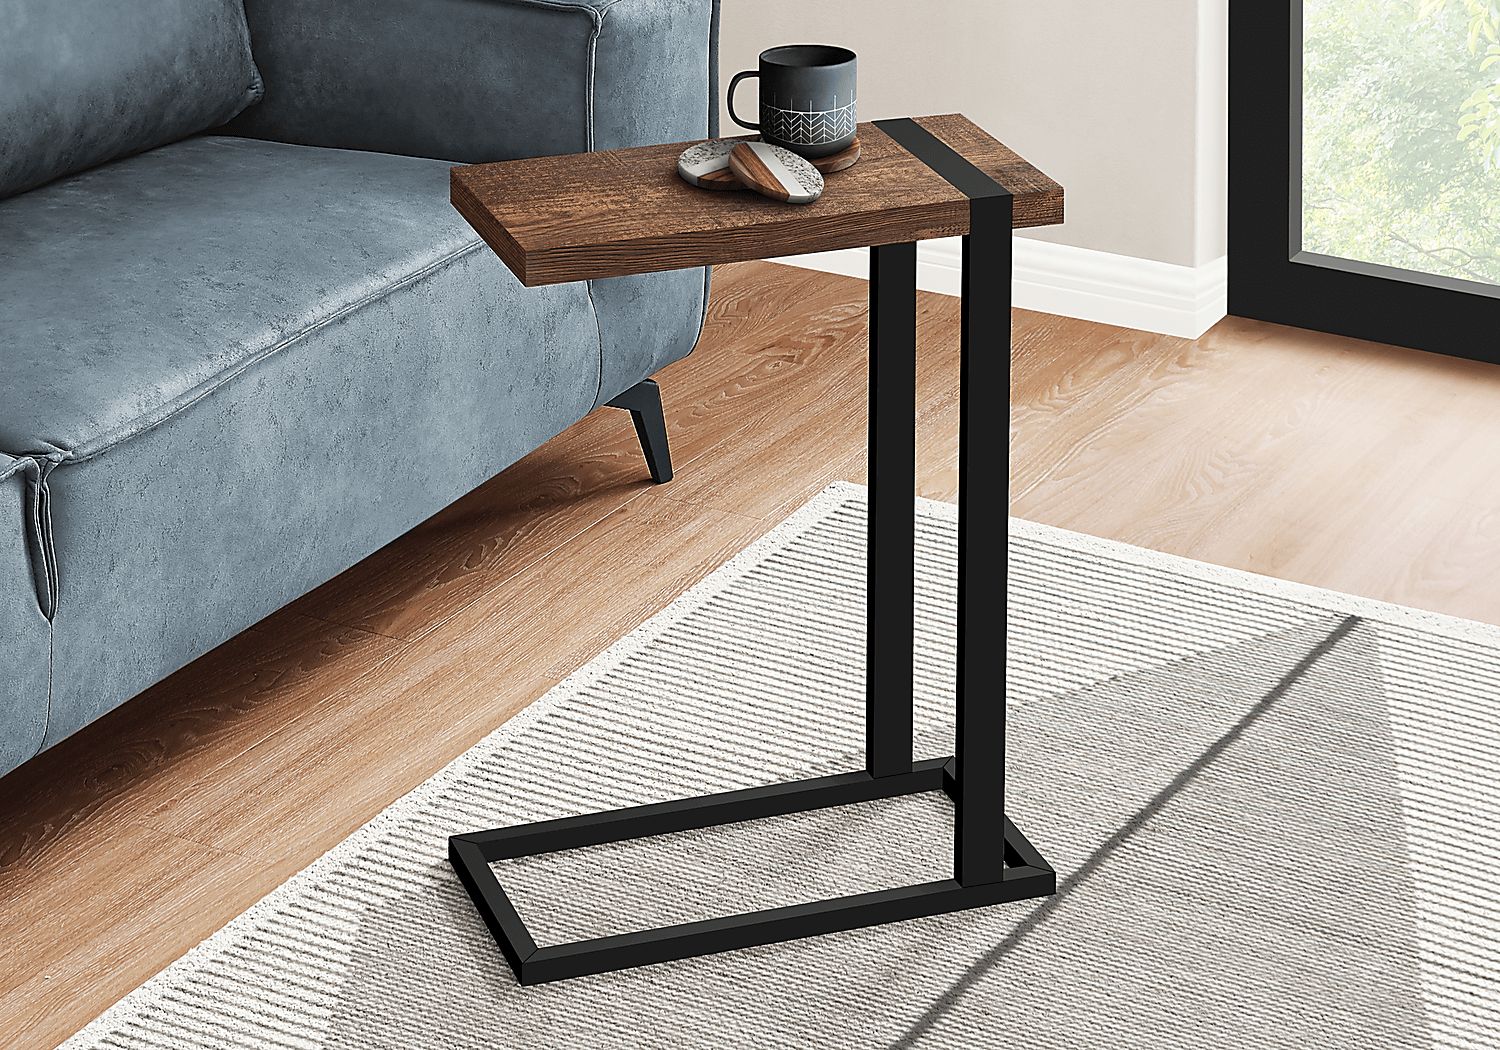 Donbree Brown Side Table